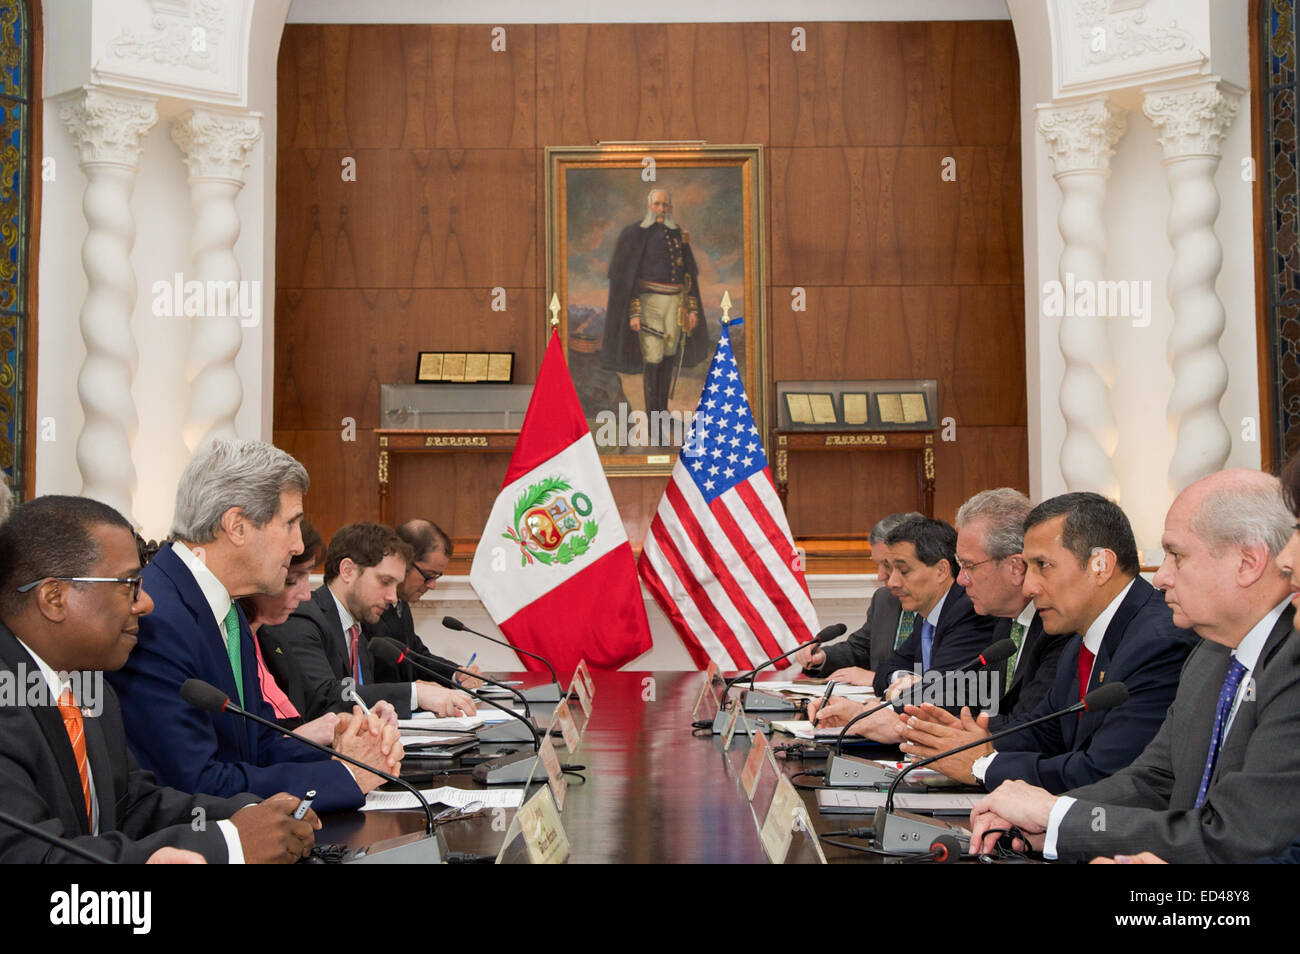 U.S. Secretary of State John Kerry and President Ollanta Humala of Peru, joined by their respective advisers, sit across from each other at the outset of a bilateral meeting in the Presidential Palace in Lima, Peru, on Dec. 11, 2014, and after the Secretary addressed the 20th session of the Conference of the Parties to the United Nations Framework Convention on Climate Change. Stock Photo